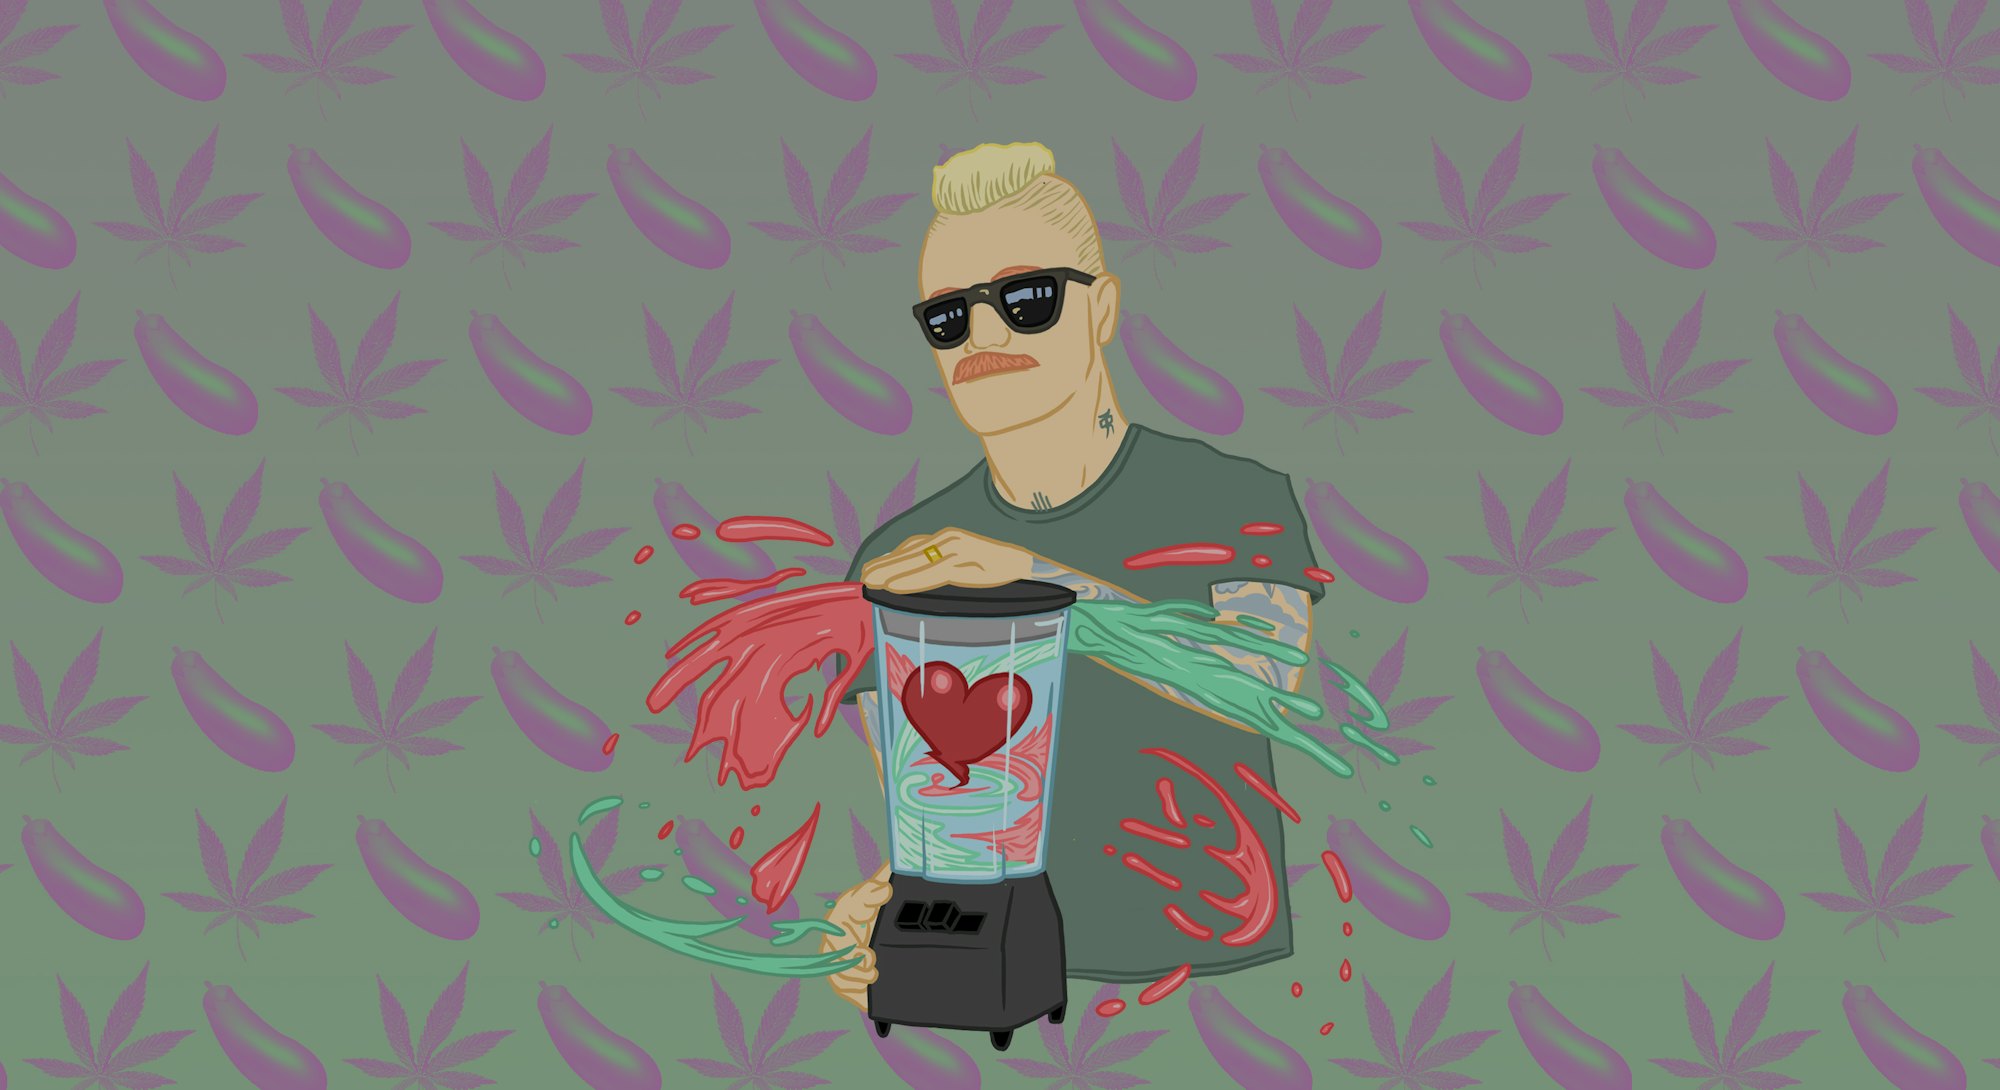 Illustration of Eve 6 frontman Max Collins